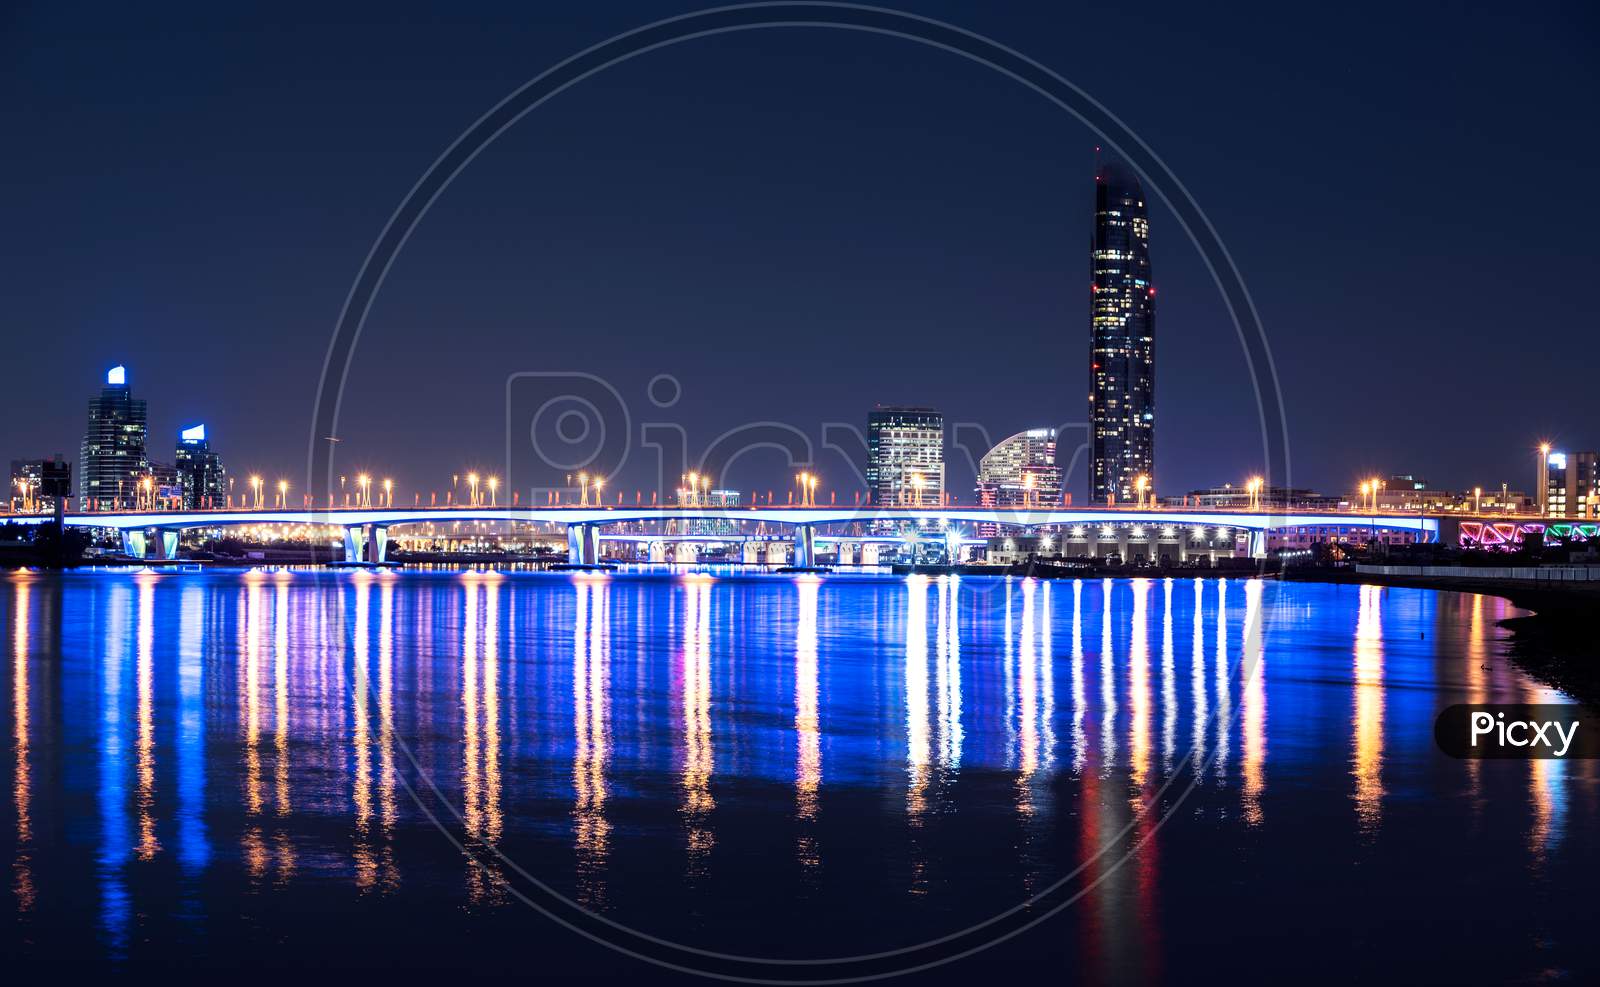 Dec 29Th 2020. Beautiful Night View Of The Illuminated Garhoud Bridge Across The Water With Reflections, Surrounded By The Majestic Sky Scrapers And Hotels Captured From The Creek Park Dubai , Uae.